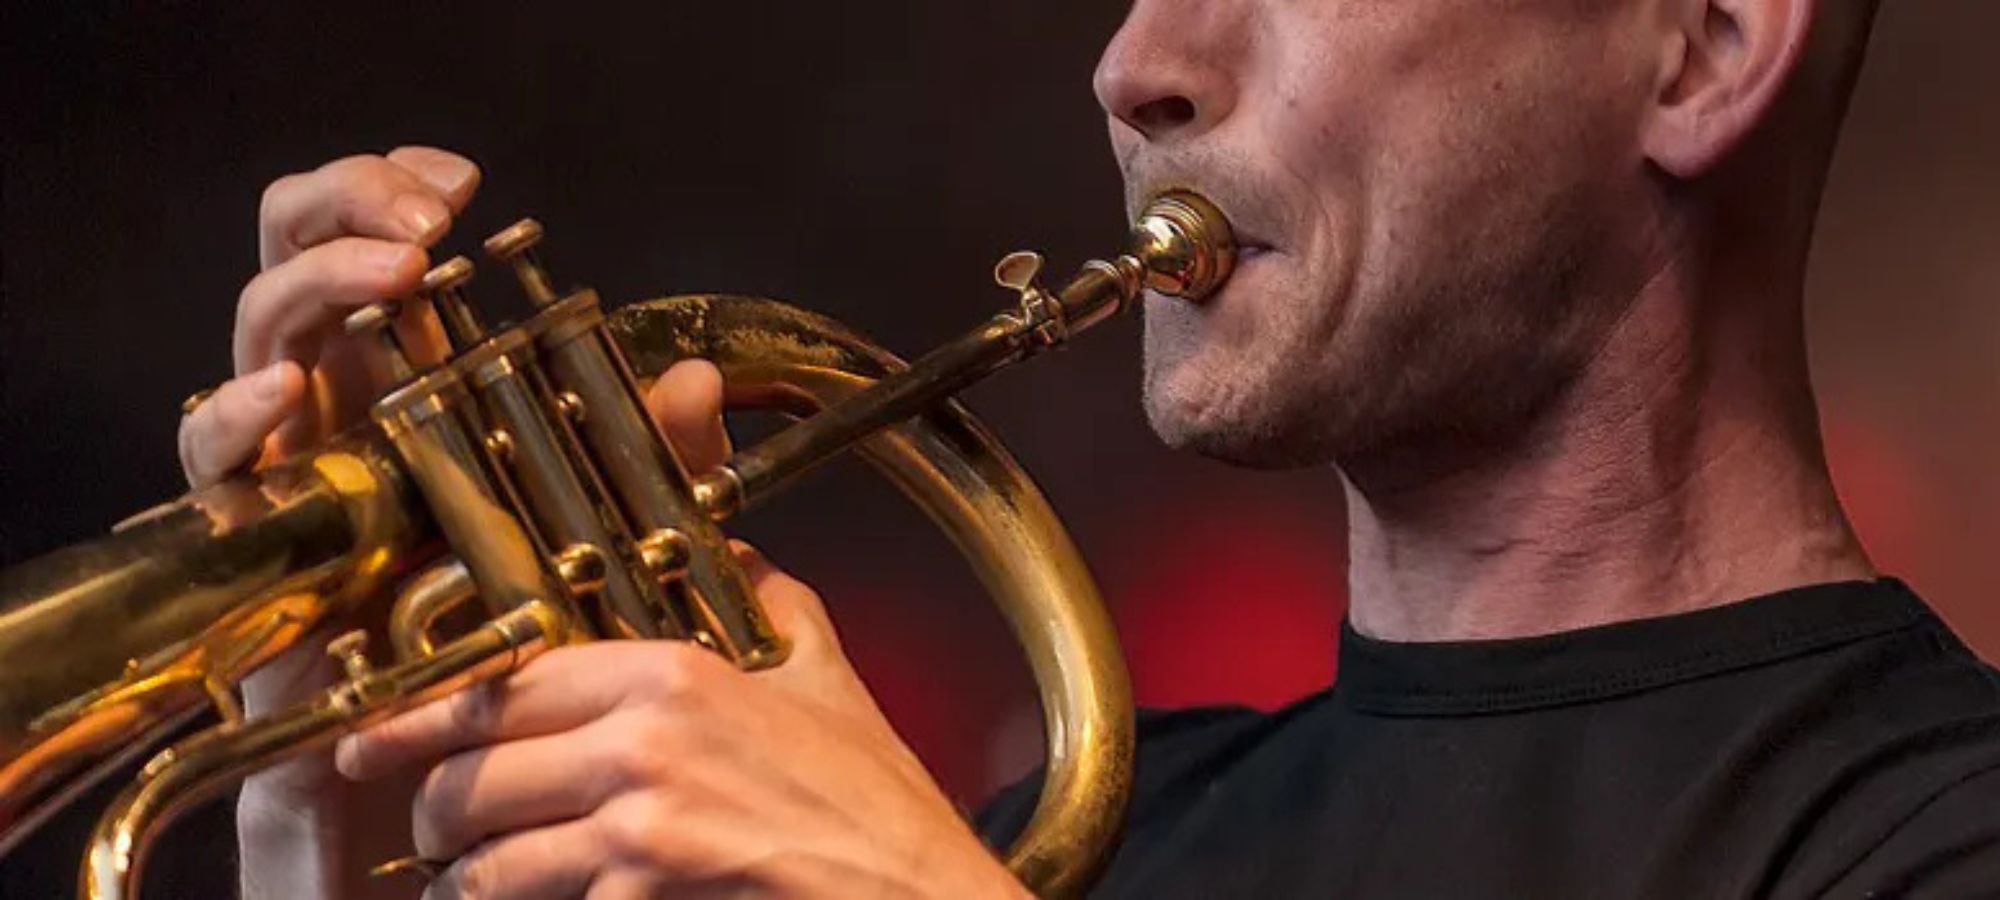 How Are Brass Instruments Played?